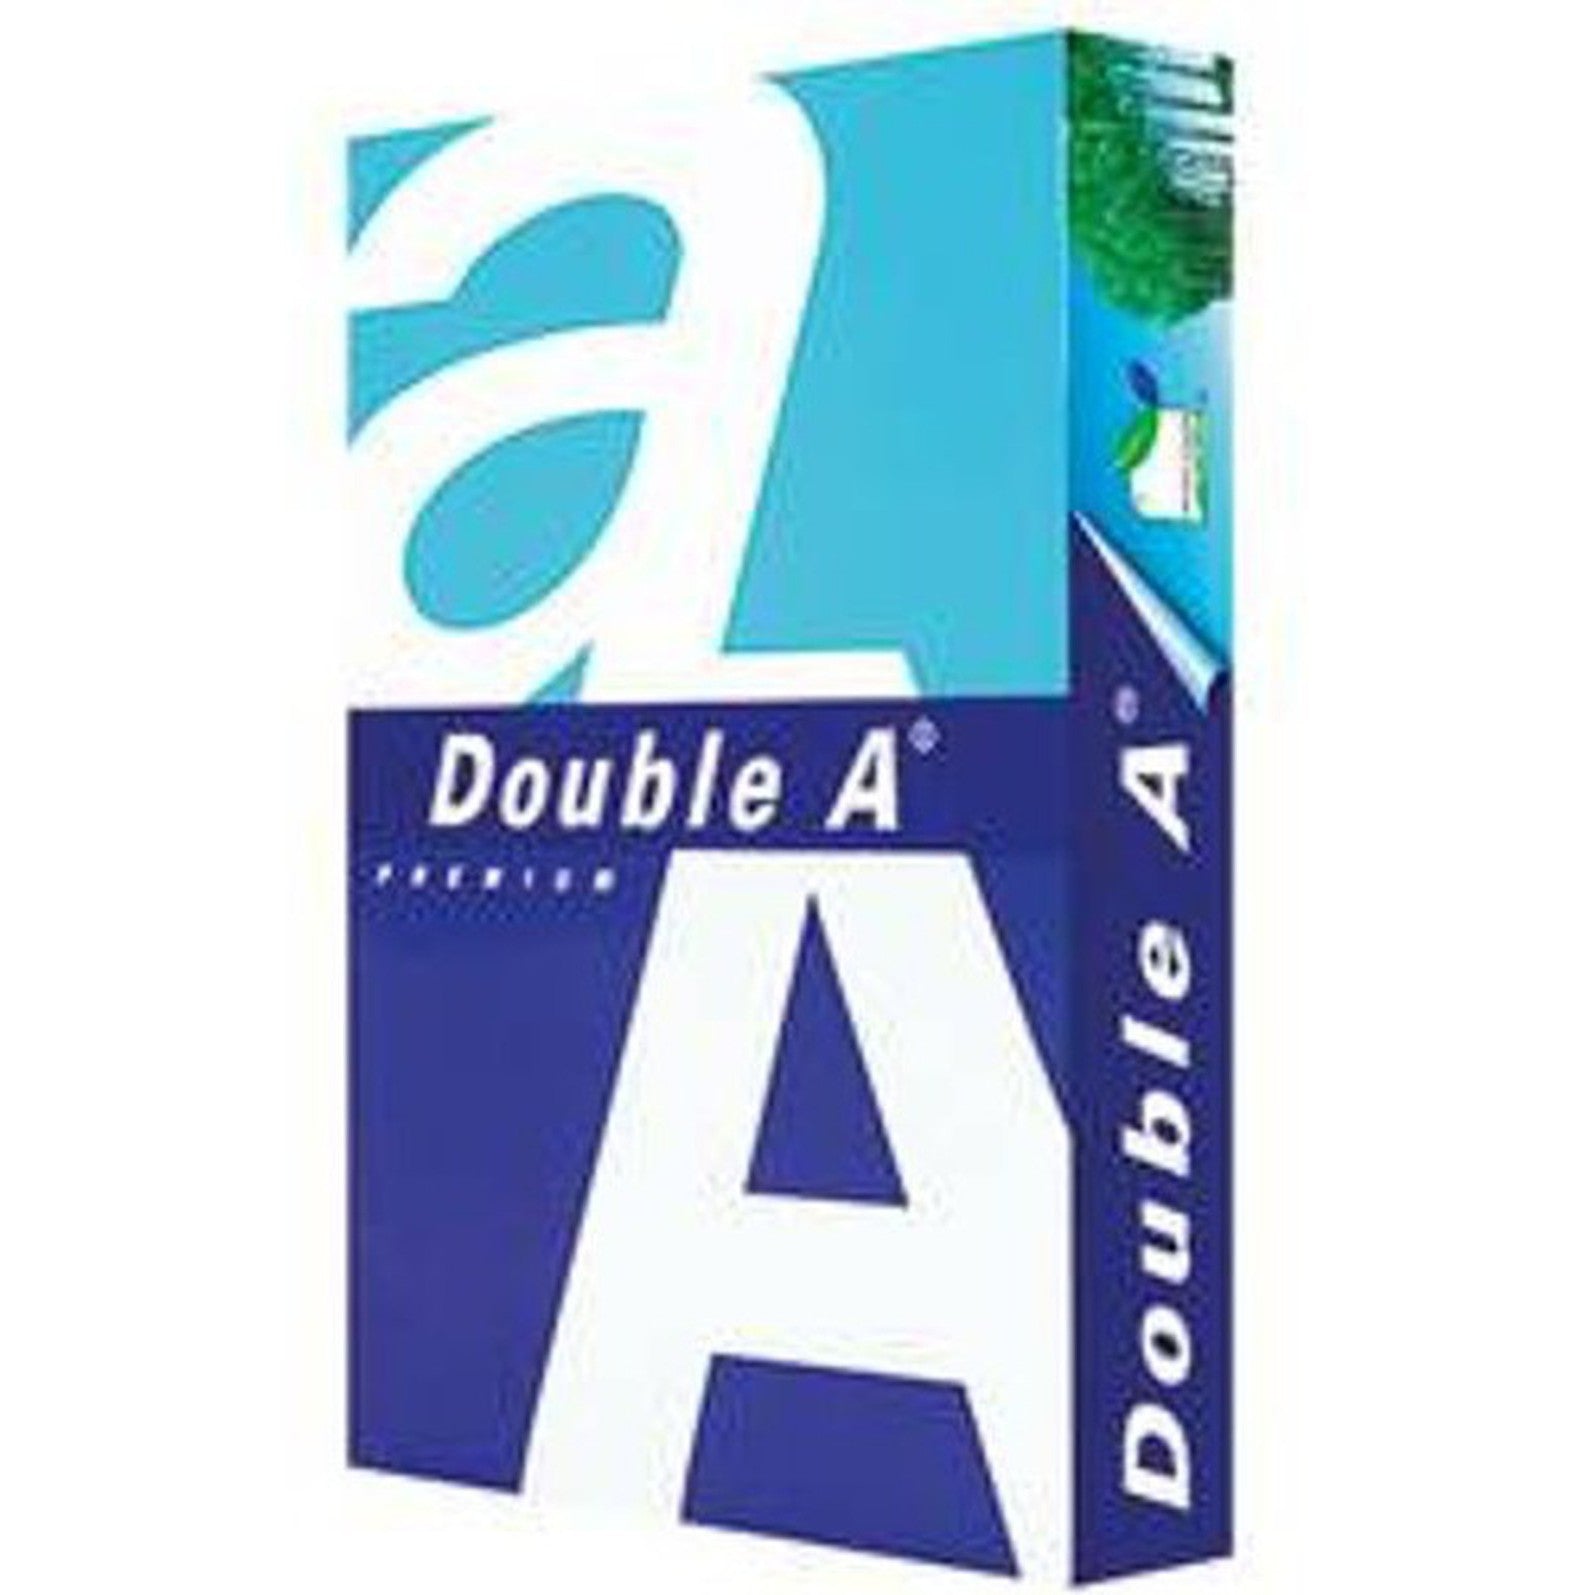 Double A - A3 Paper 80 Gsm Premium Multi Purpose Paper-A3 Papers-Other-Box-Star Light Kuwait